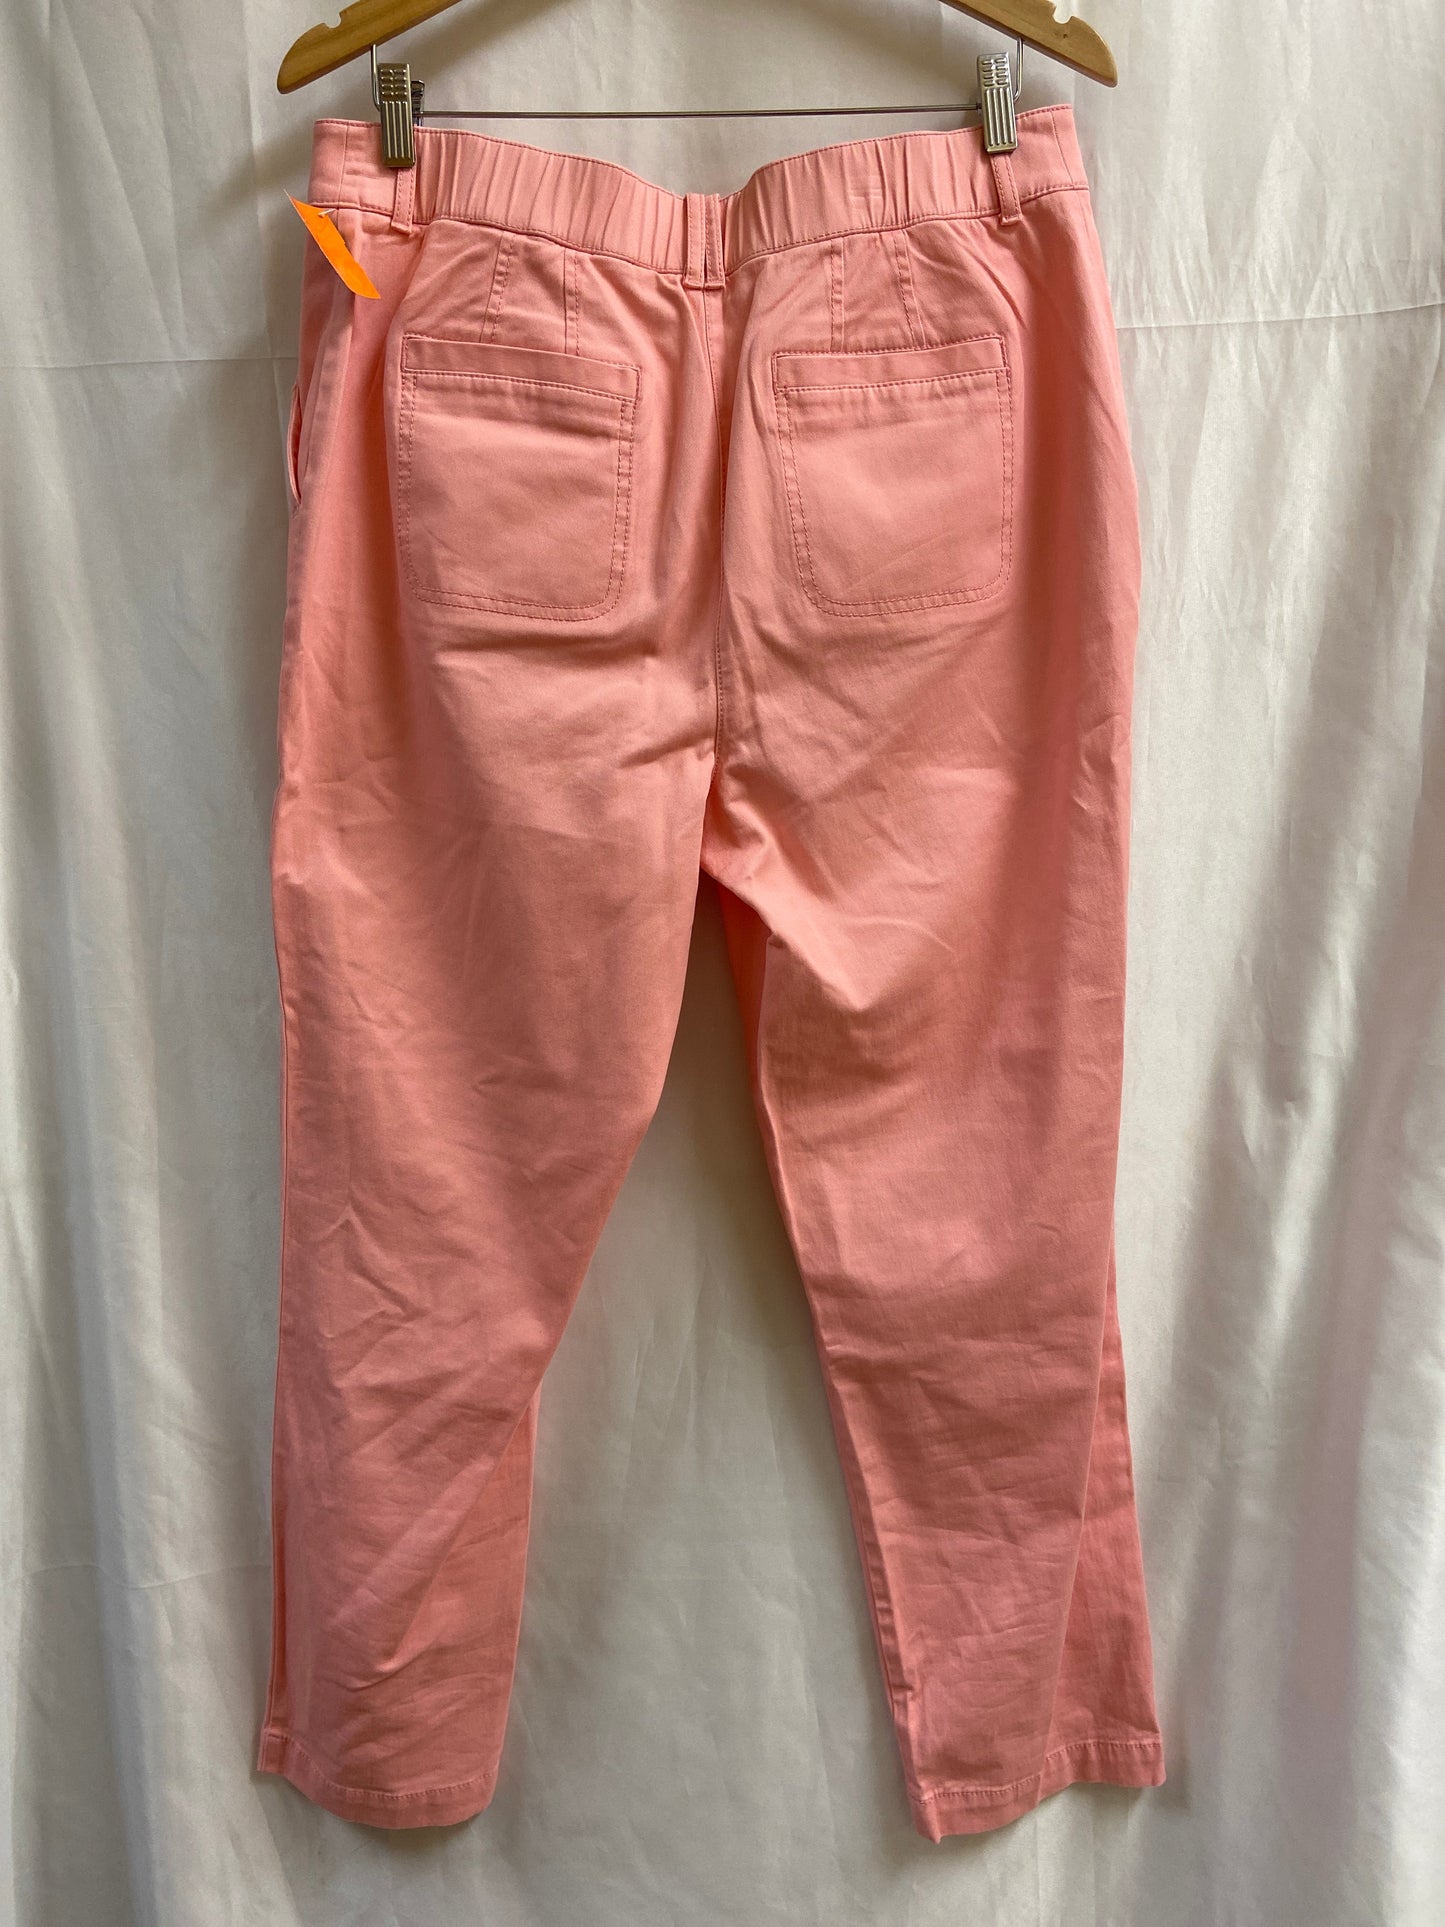 Pants Ankle By Talbots  Size: 12